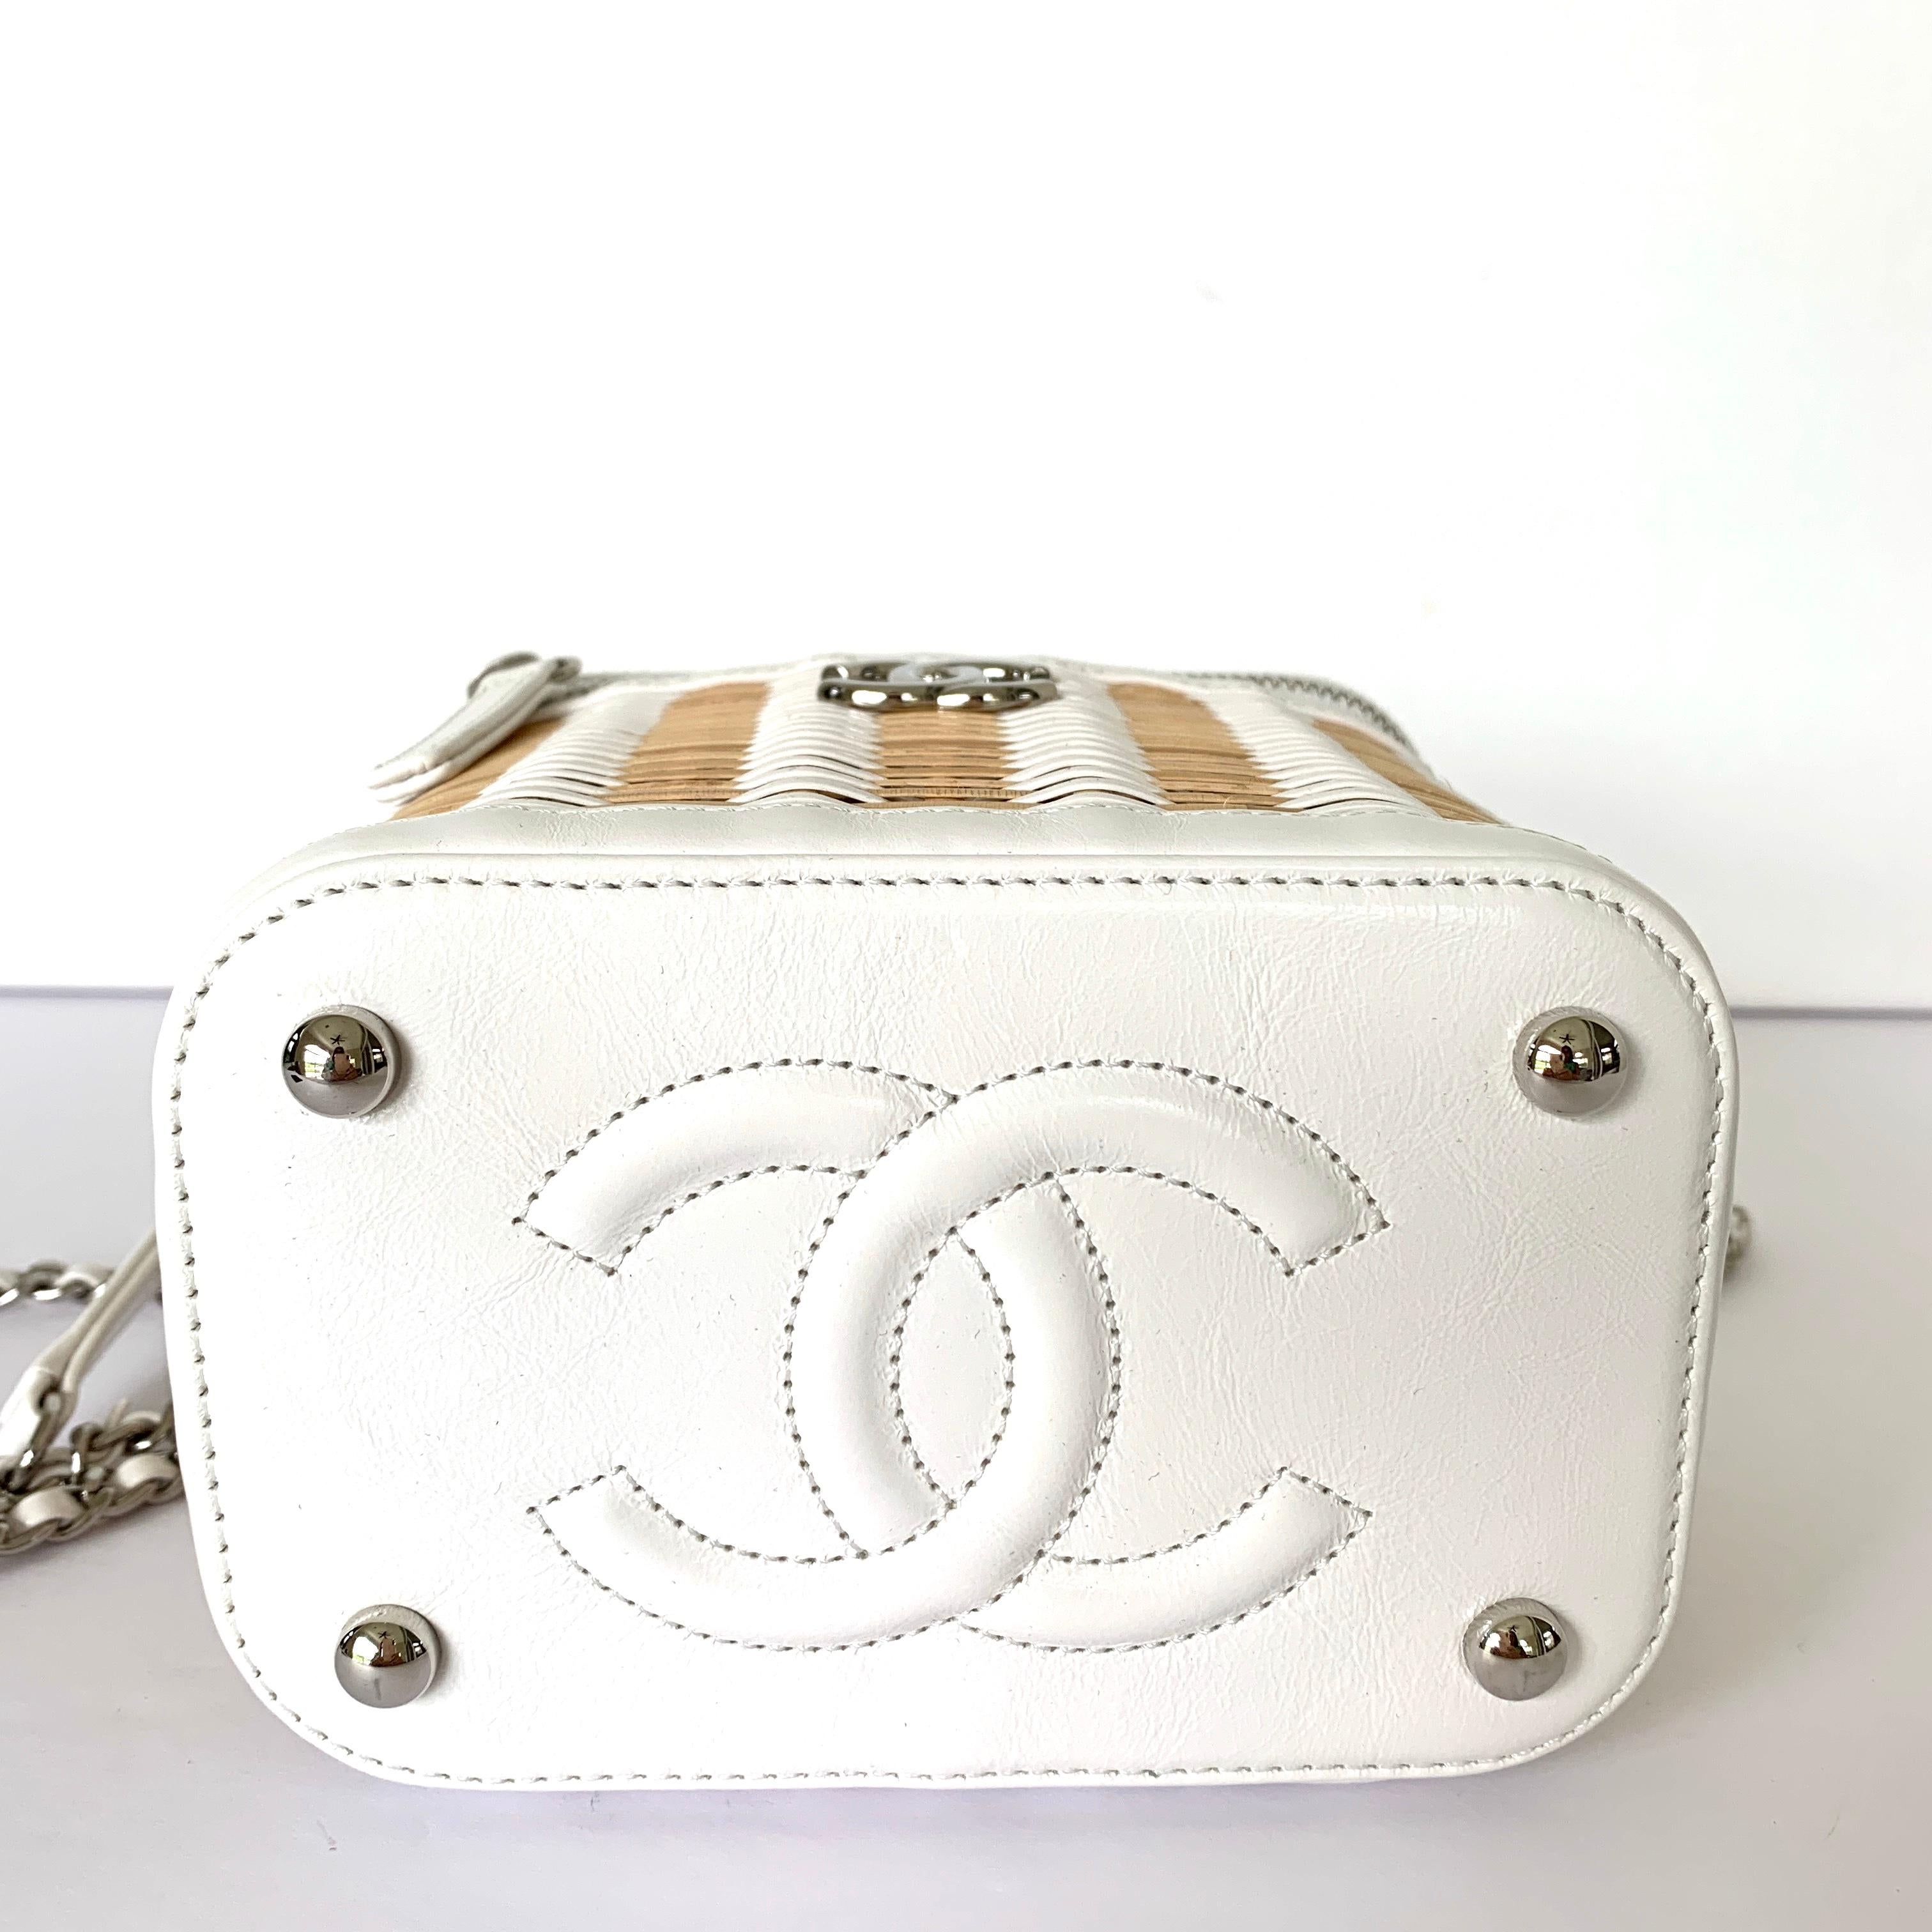 Chanel
CC logo on the front
Top handle and an interwoven silver tone chain link with white leather shoulder strap.

The interior is lined with beige fabric and has no interior pockets.

Collection: 29-series
20C Collection
AS1352 B01919